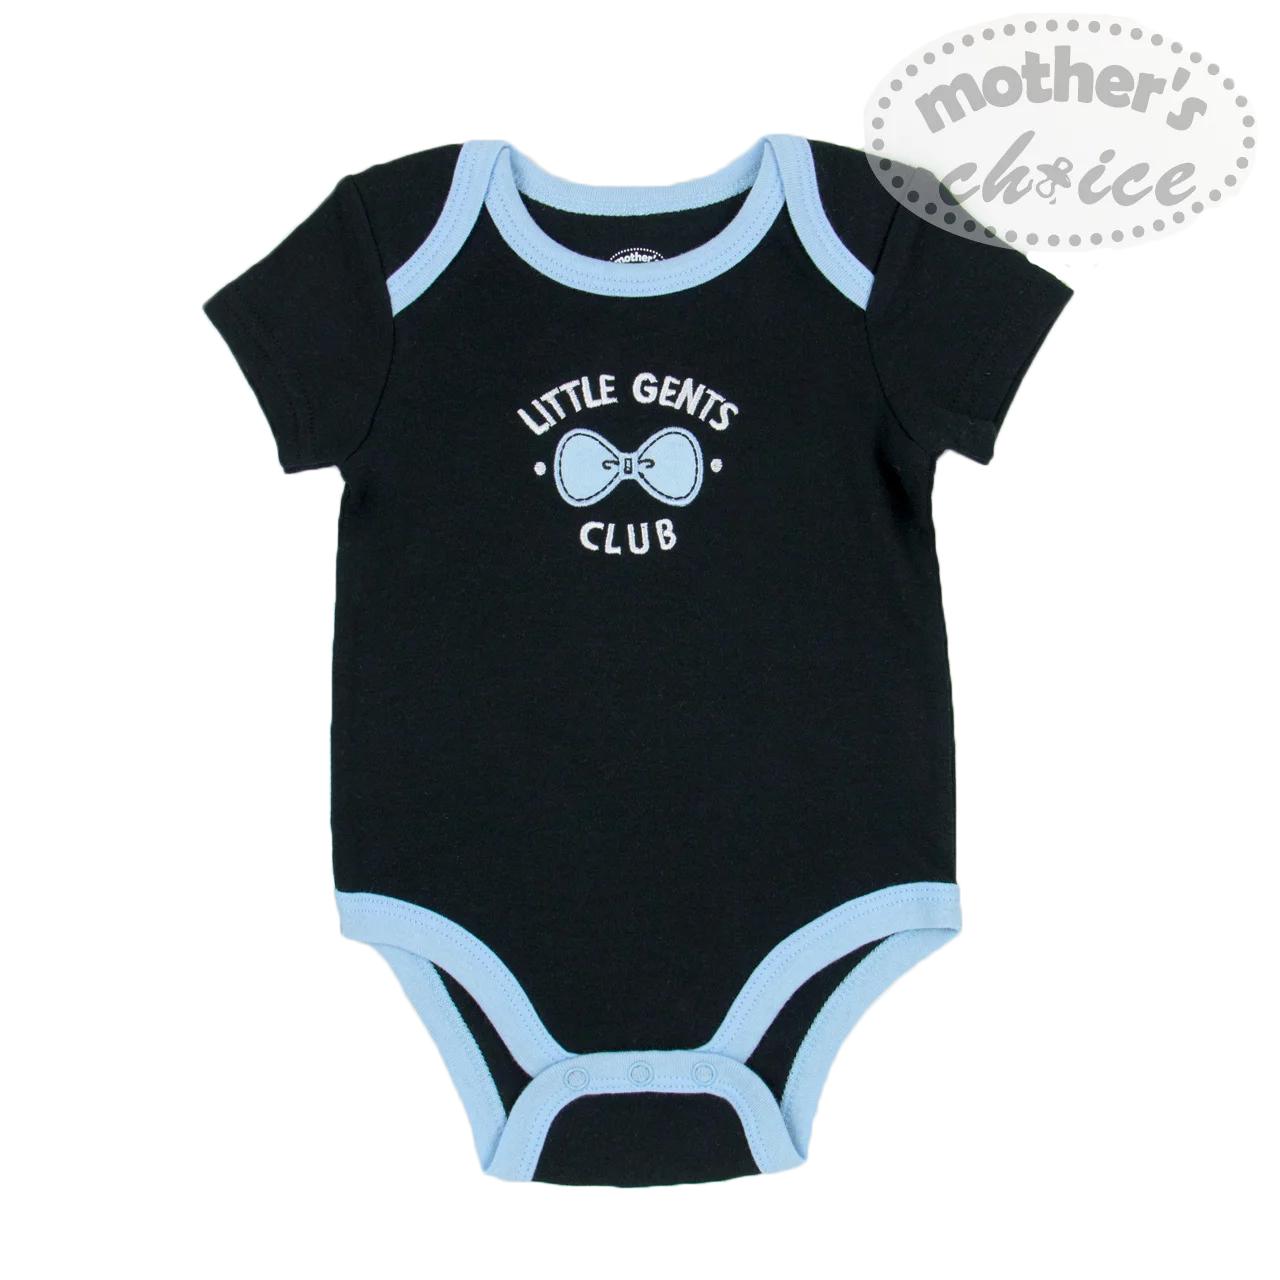 Mother's Choice 3 Pack Short Sleeves Onesie (Little Gents Club/ IT2015)